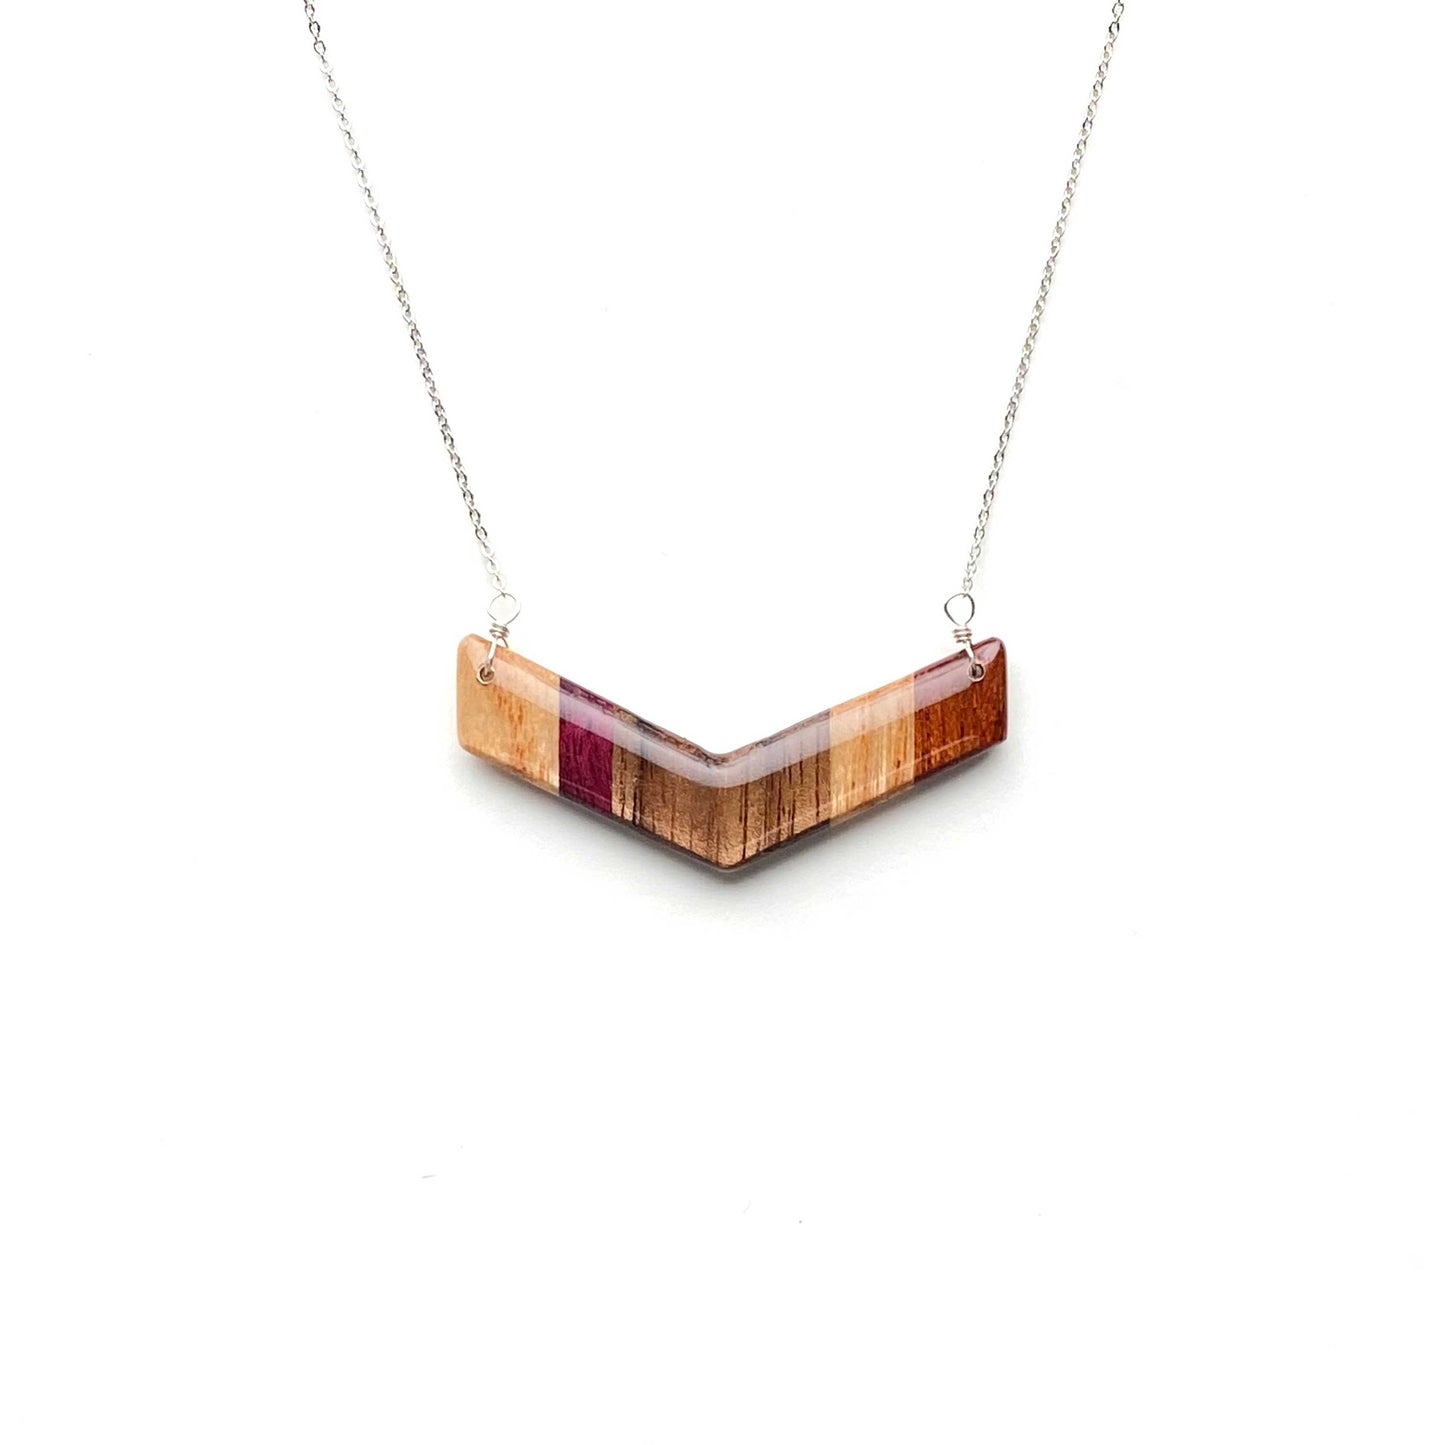 Chevron Reclaimed Wood Necklace